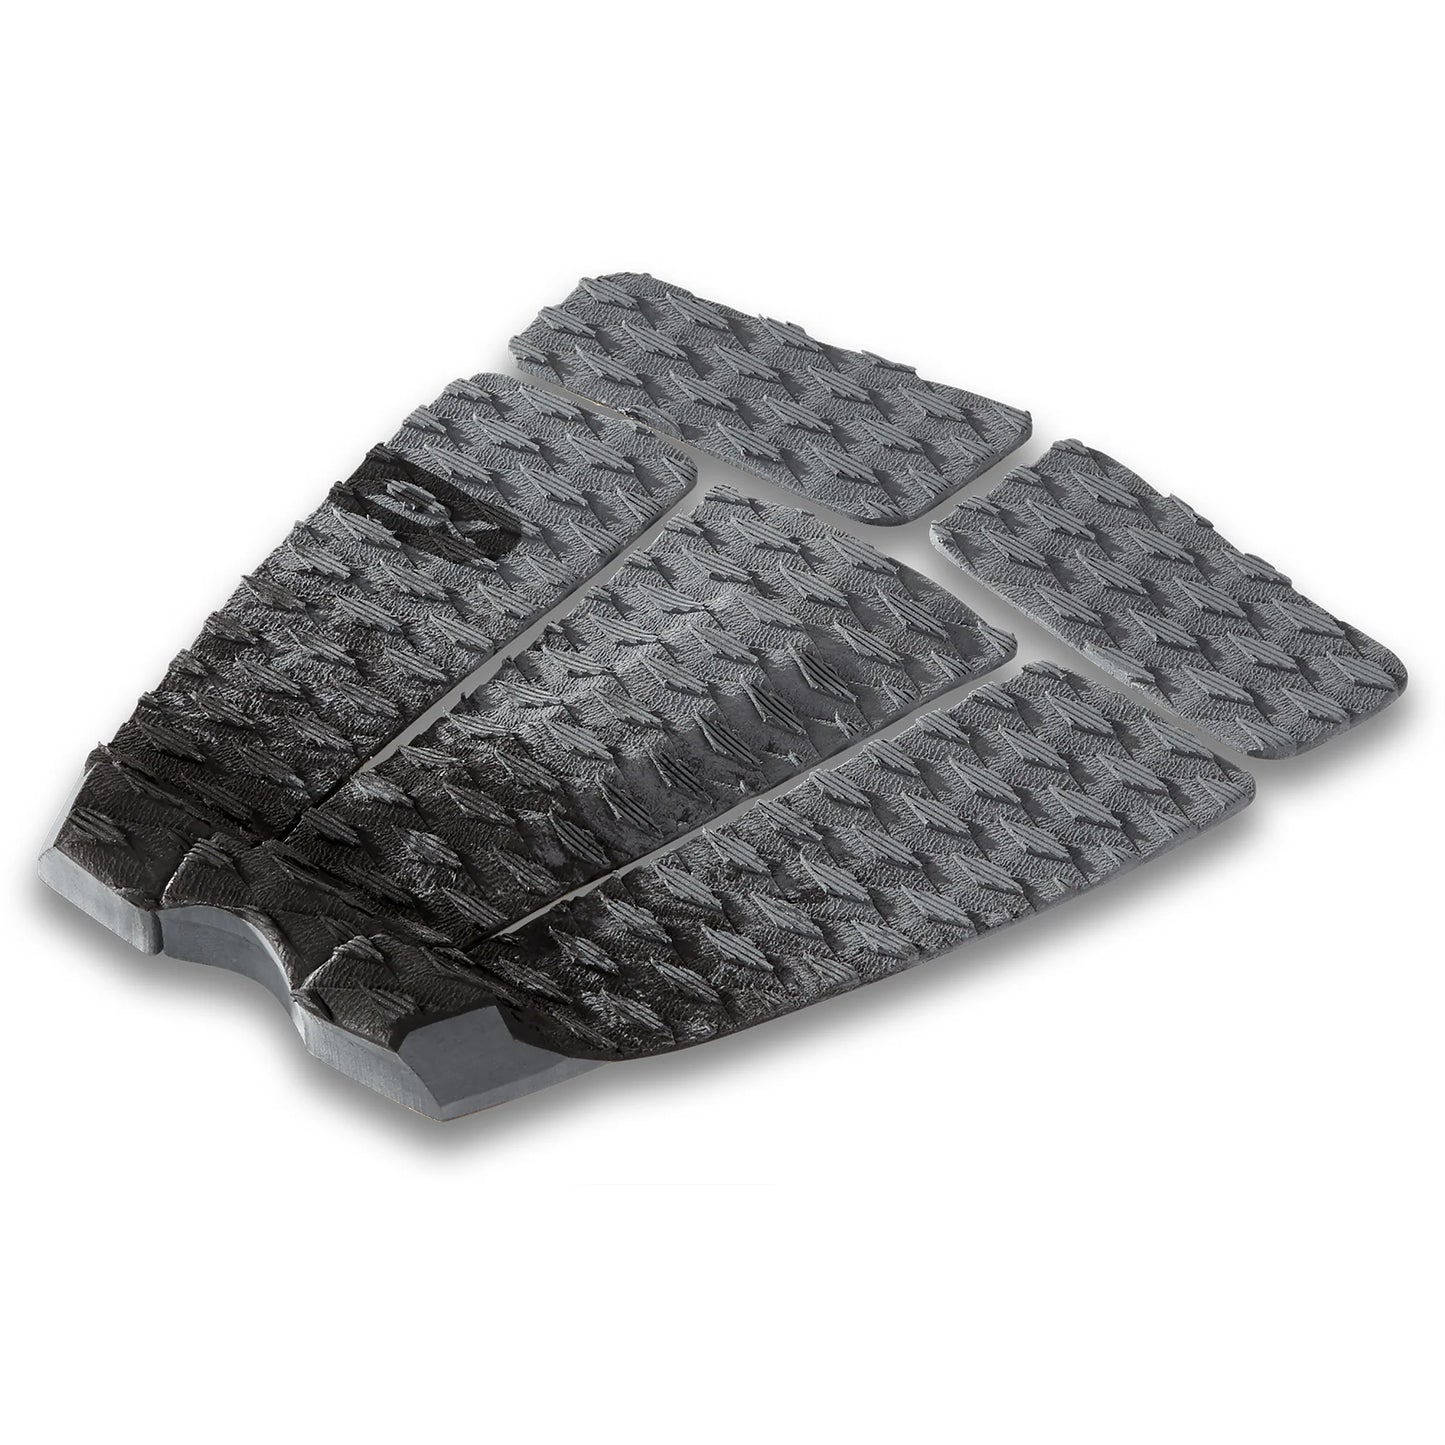 Bruce Irons Pro Surf Traction Pad